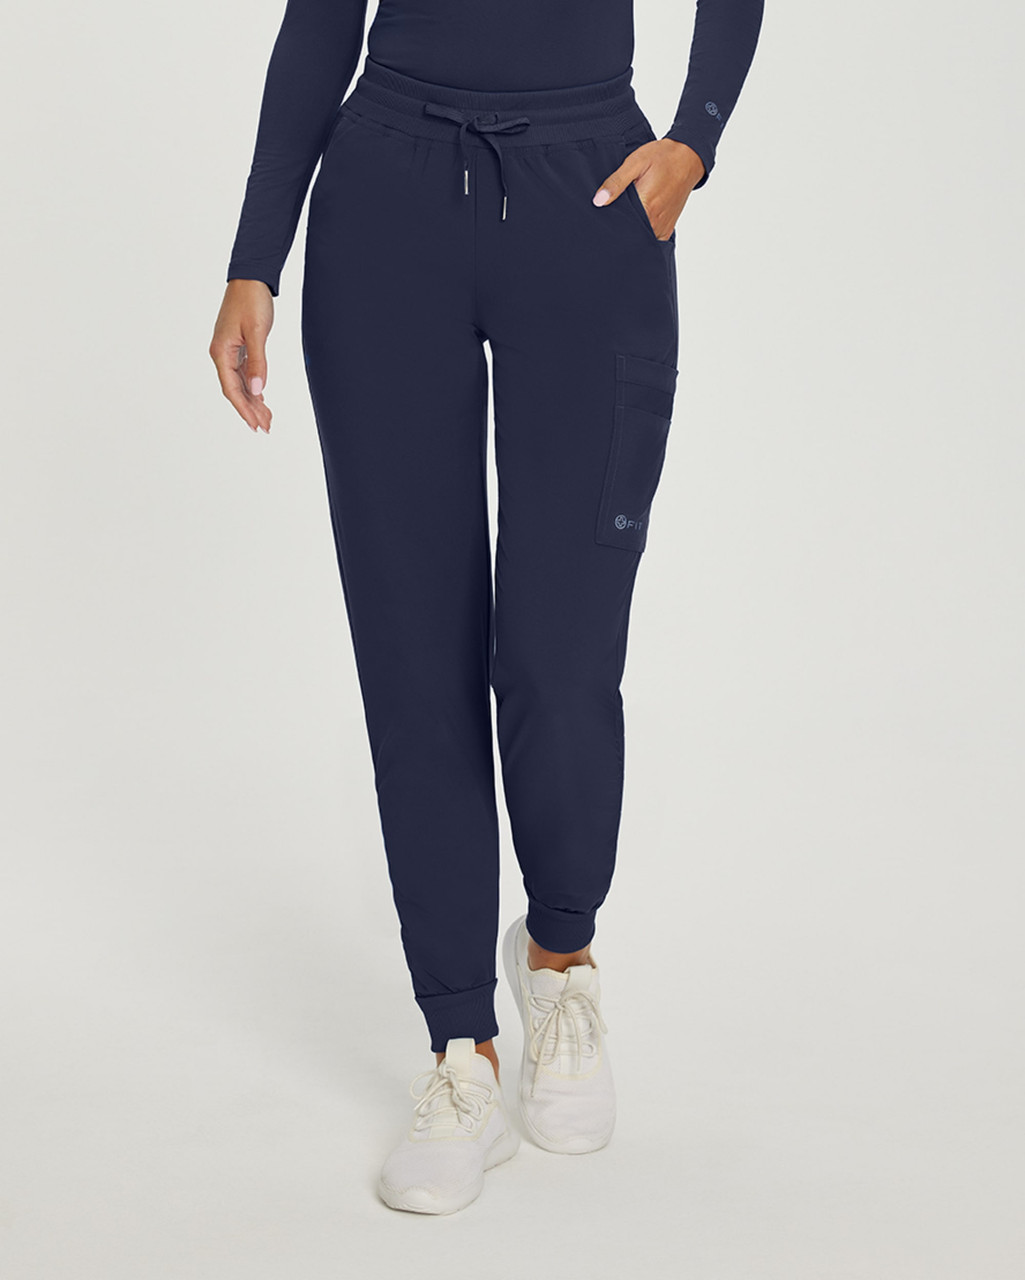 FILA Women's sweat pants - L - Blk with pockets - clothing